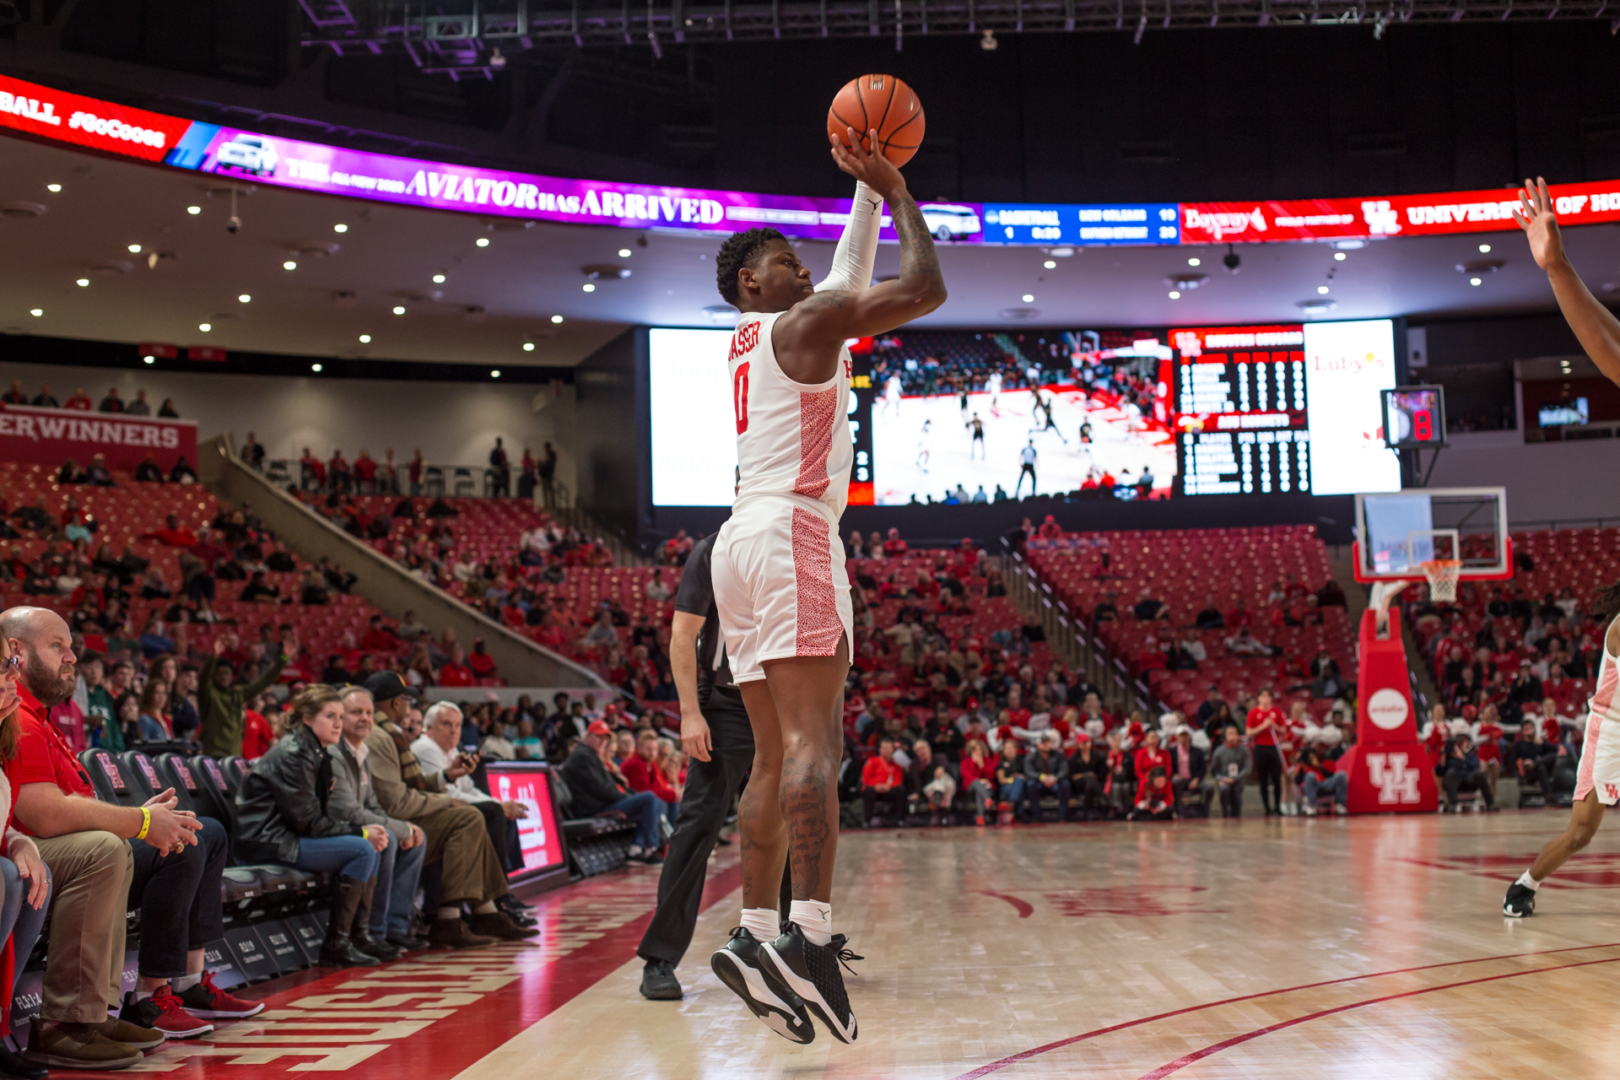 Freshman guard Marcus Sasser led the team in scoring with 14 points in Houston's 84-56 season-opening win over Alabama State on Tuesday night at Fertitta Center. | Trevor Nolley/The Cougar